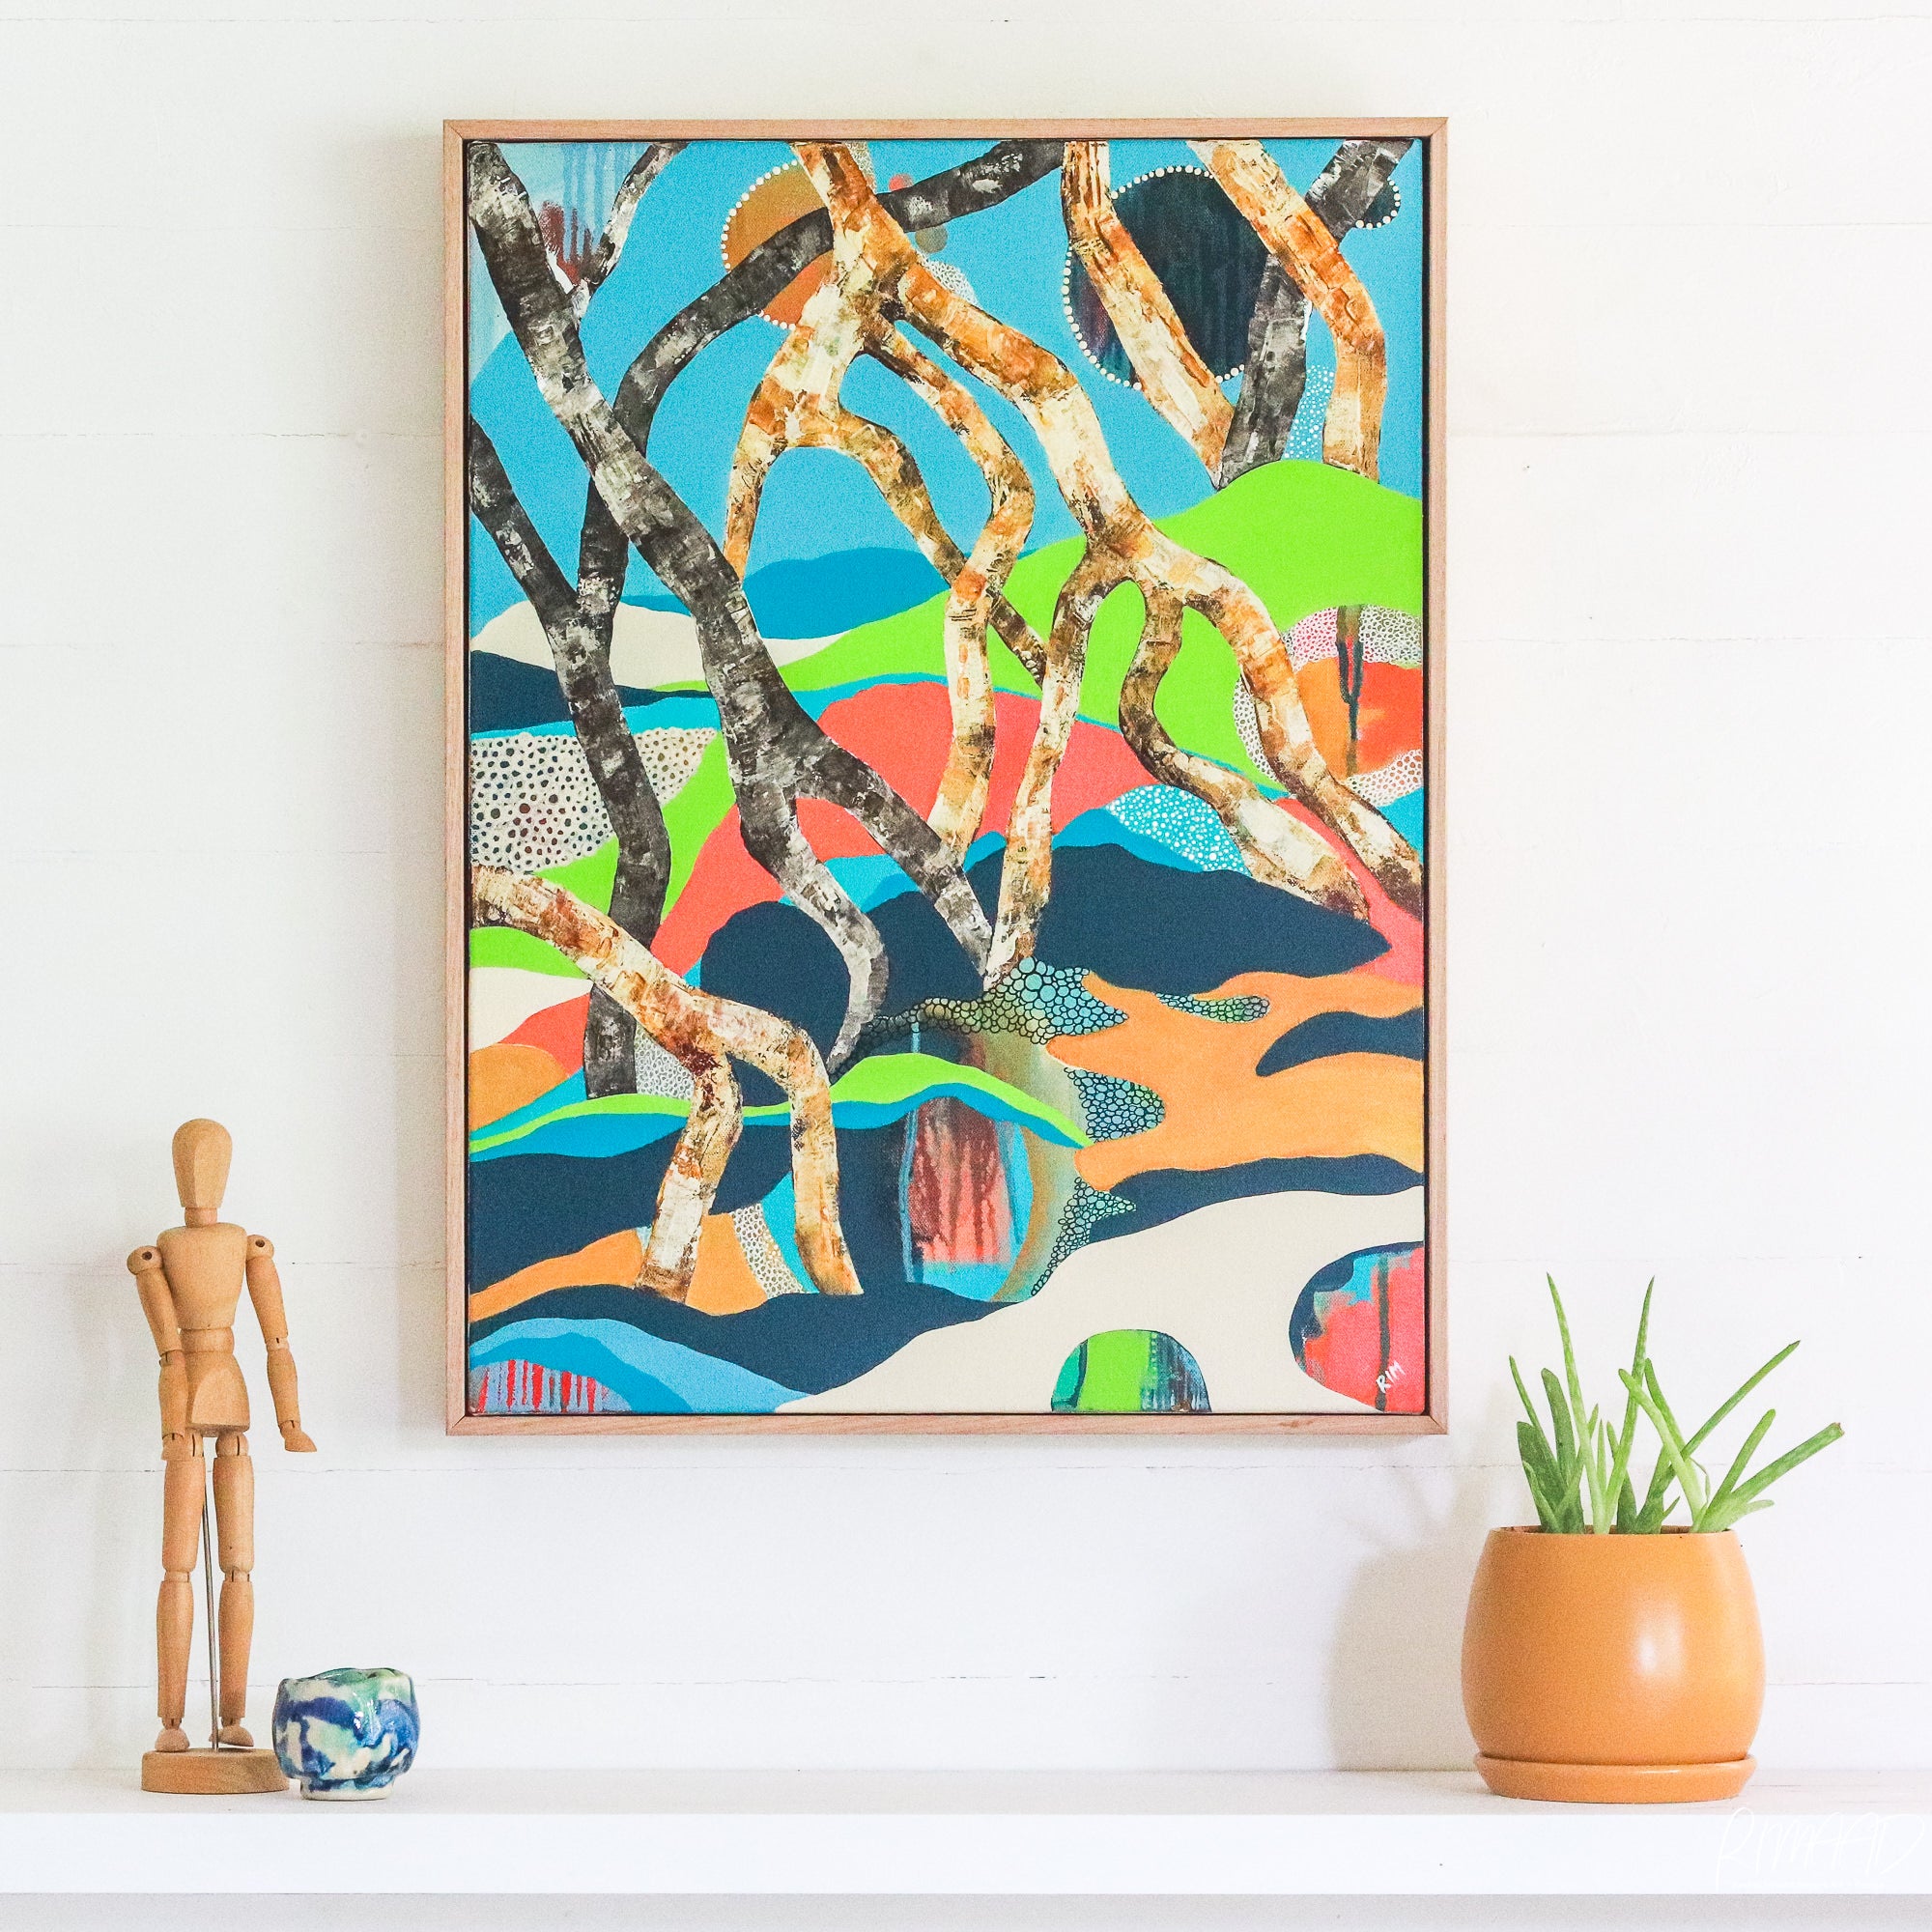 Original Artwork by Rachel Ireland Meyers, titled; "Round The Bend." Mangroves, bright colours, seascape, Rimaad, Cairns, Qld. Show here framed in Custom Ash Frame.